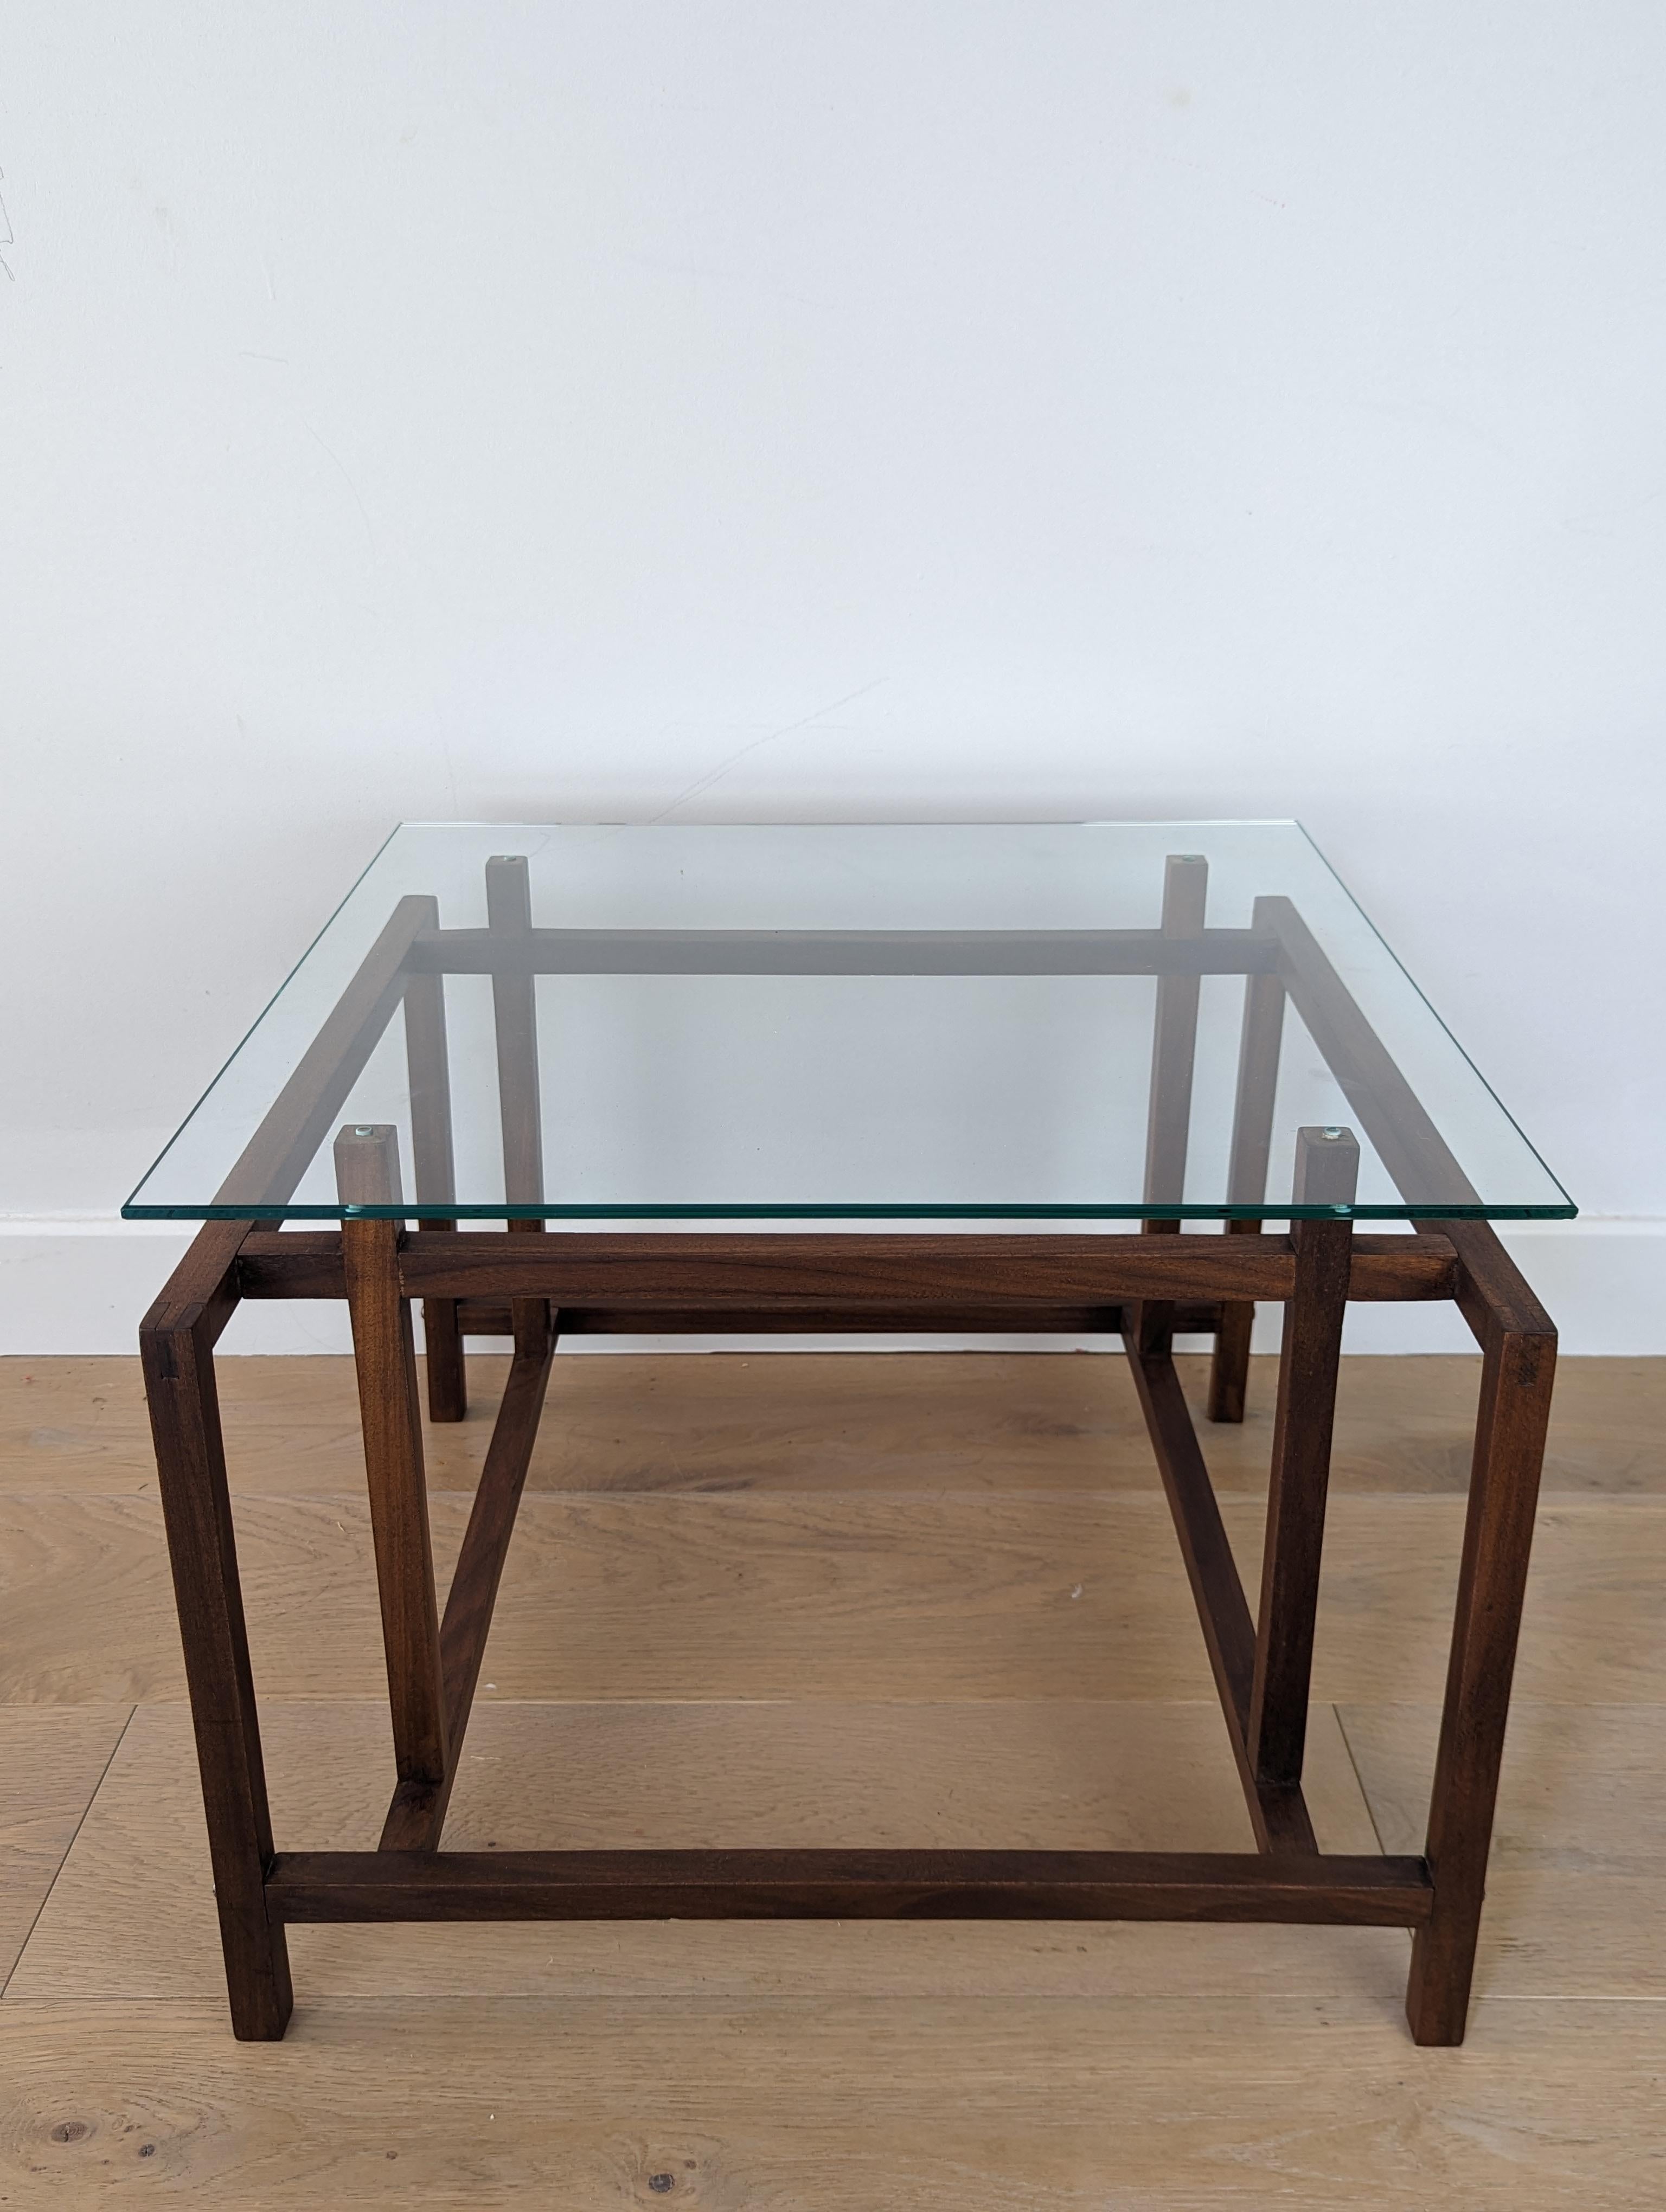 Henning Norgaard for Komfort side table in teak with glass table top.

This stunning little side/coffee table has a geometric teak base that is elegant and stylish. The glass table top sits delicately over the frame which has been restored to its